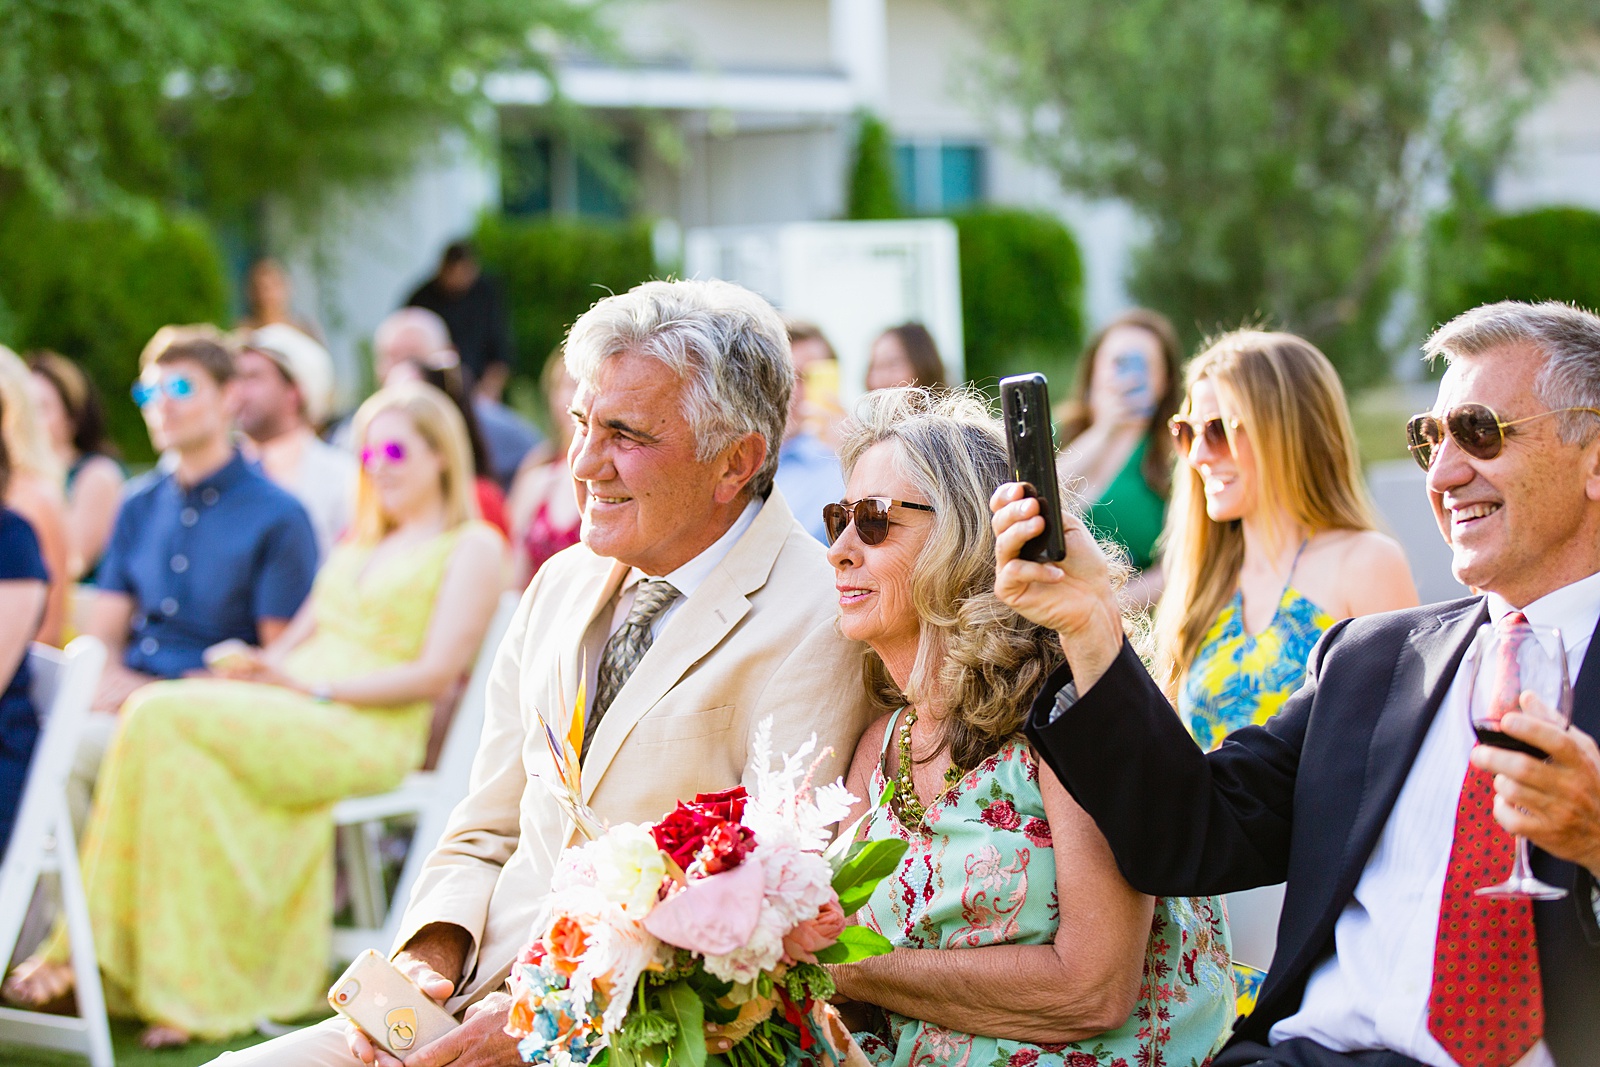 Wedding guests watching the wedding ceremony at Mountain Shadows Resort by Paradise Valley wedding photographer PMA Photography.